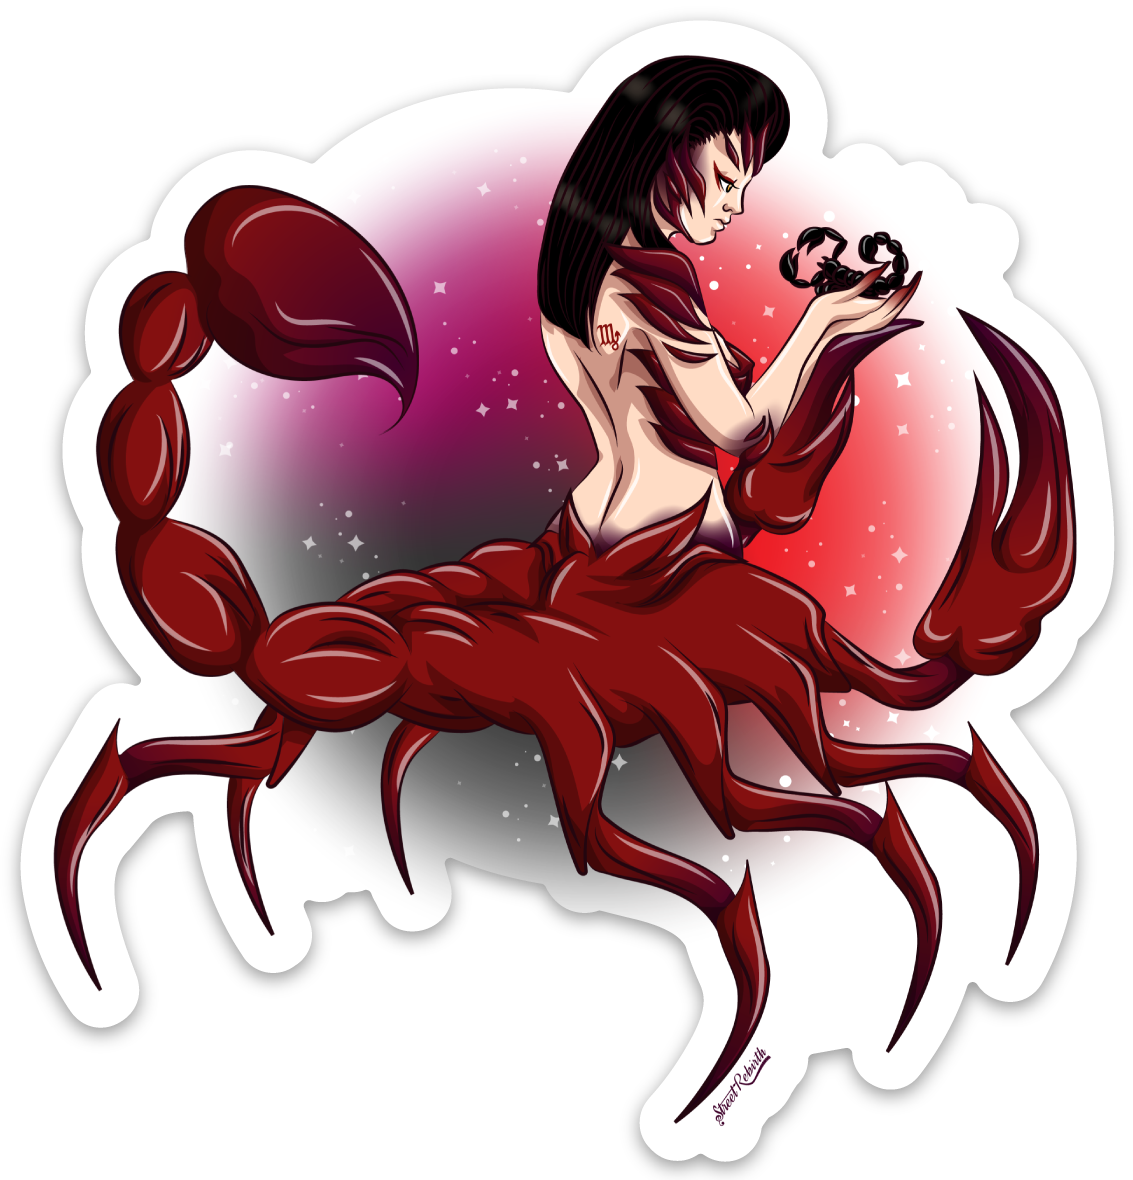 Scorpion Girl PUN STICKER – ONE 4 INCH WATER PROOF VINYL STICKER – FOR HYDRO FLASK, SKATEBOARD, LAPTOP, PLANNER, CAR, COLLECTING, GIFTING